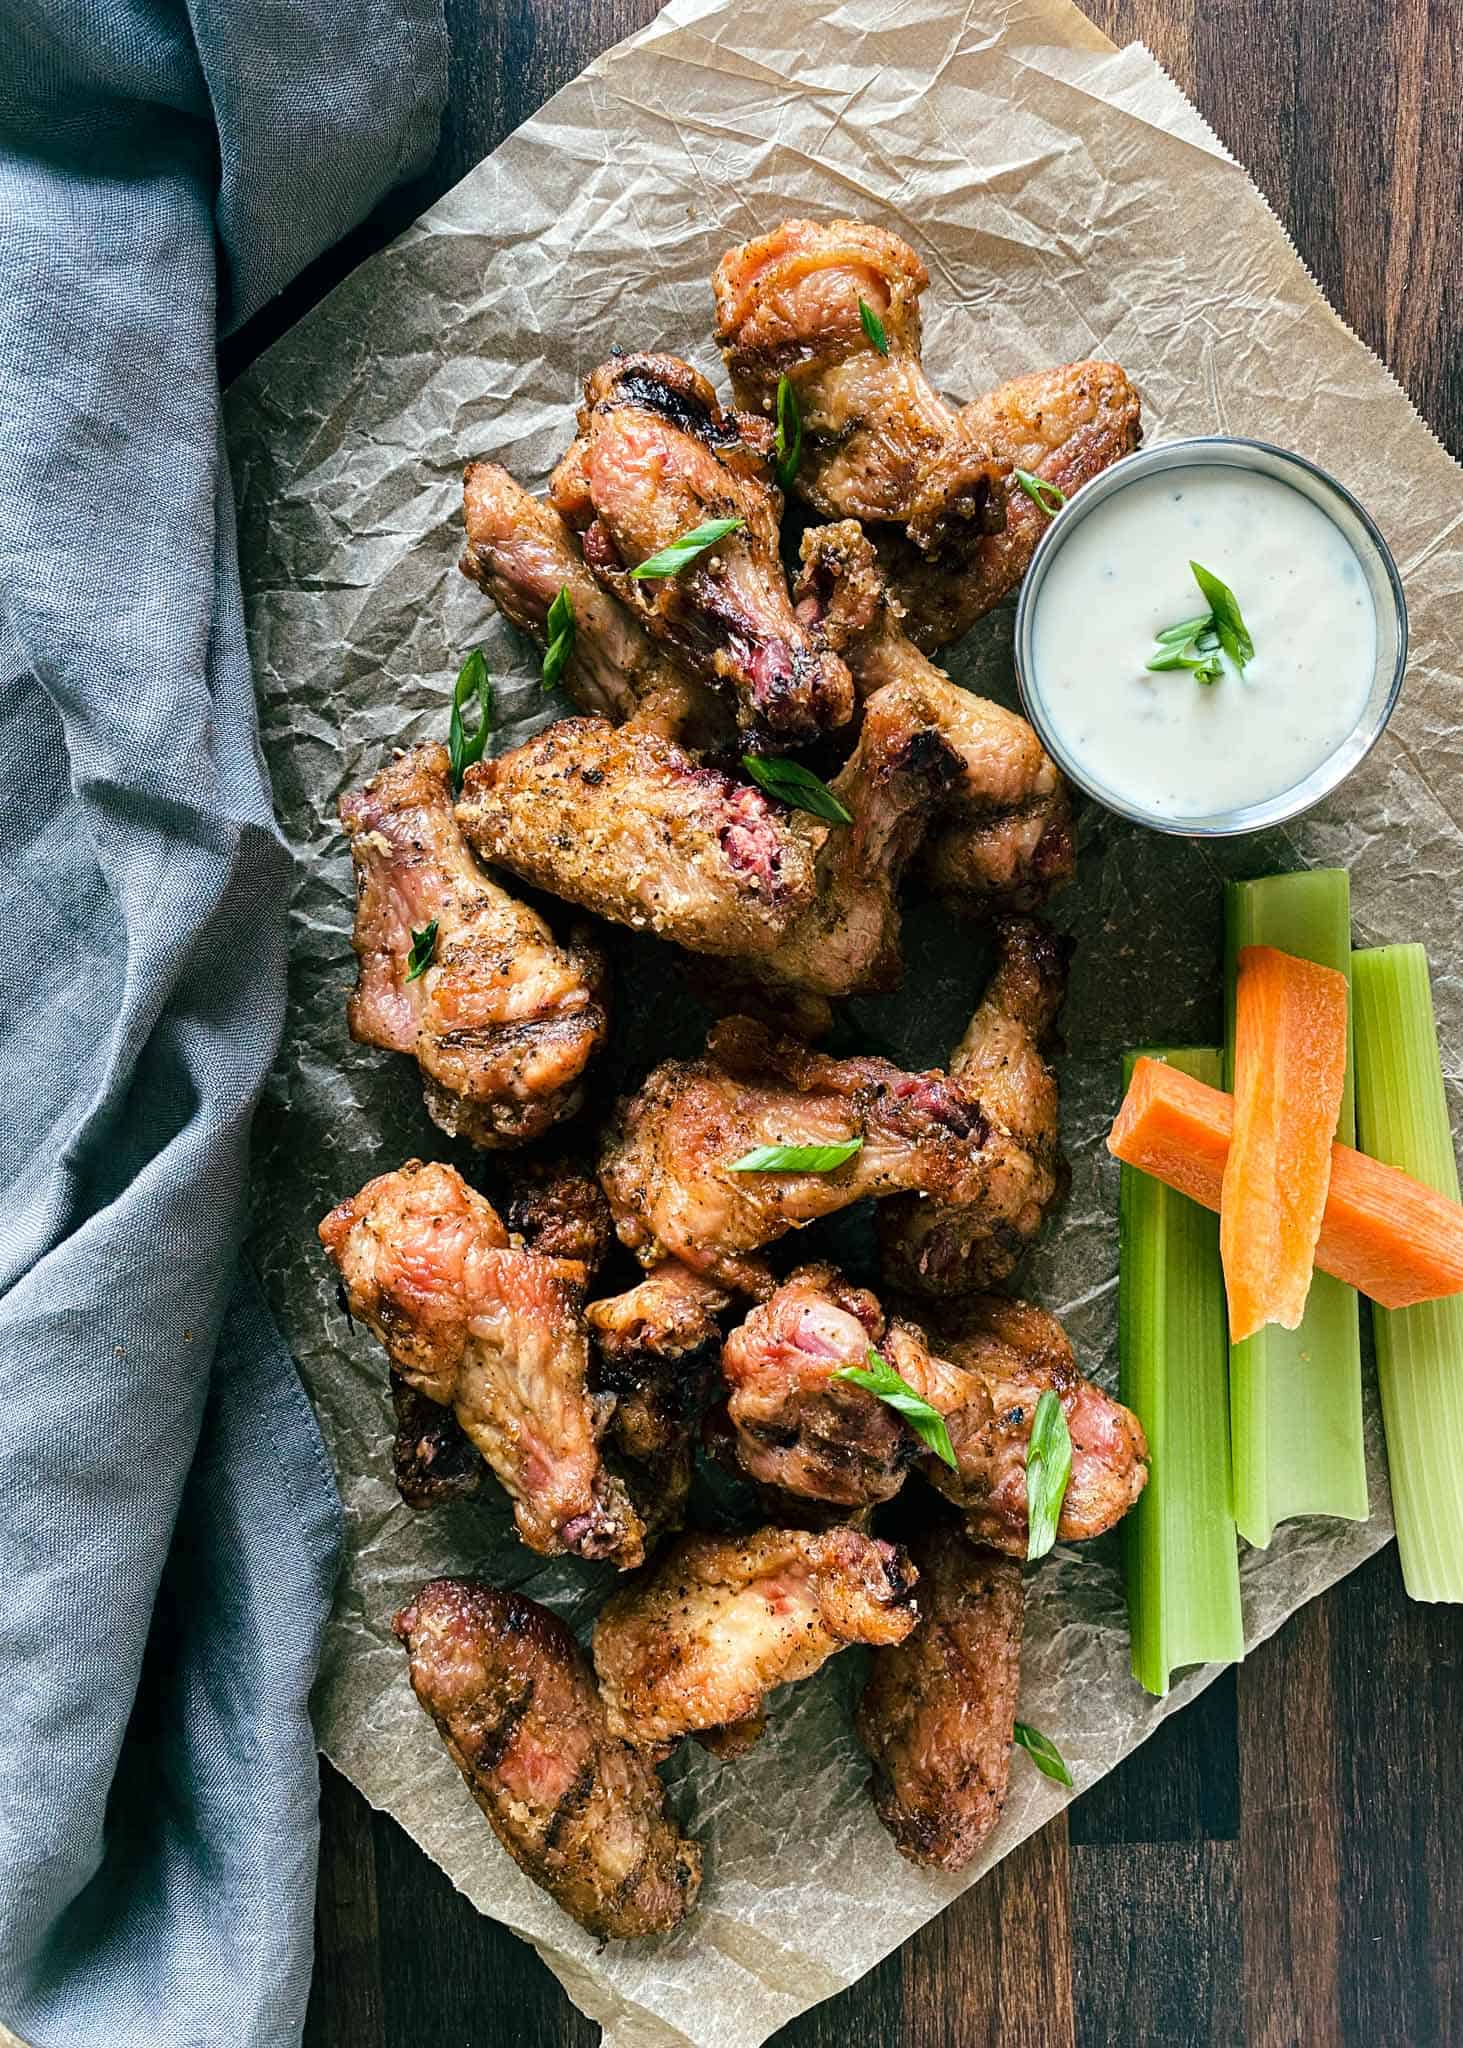 Smoked crispy chicken wings with dipping sauce and fresh vegetables.